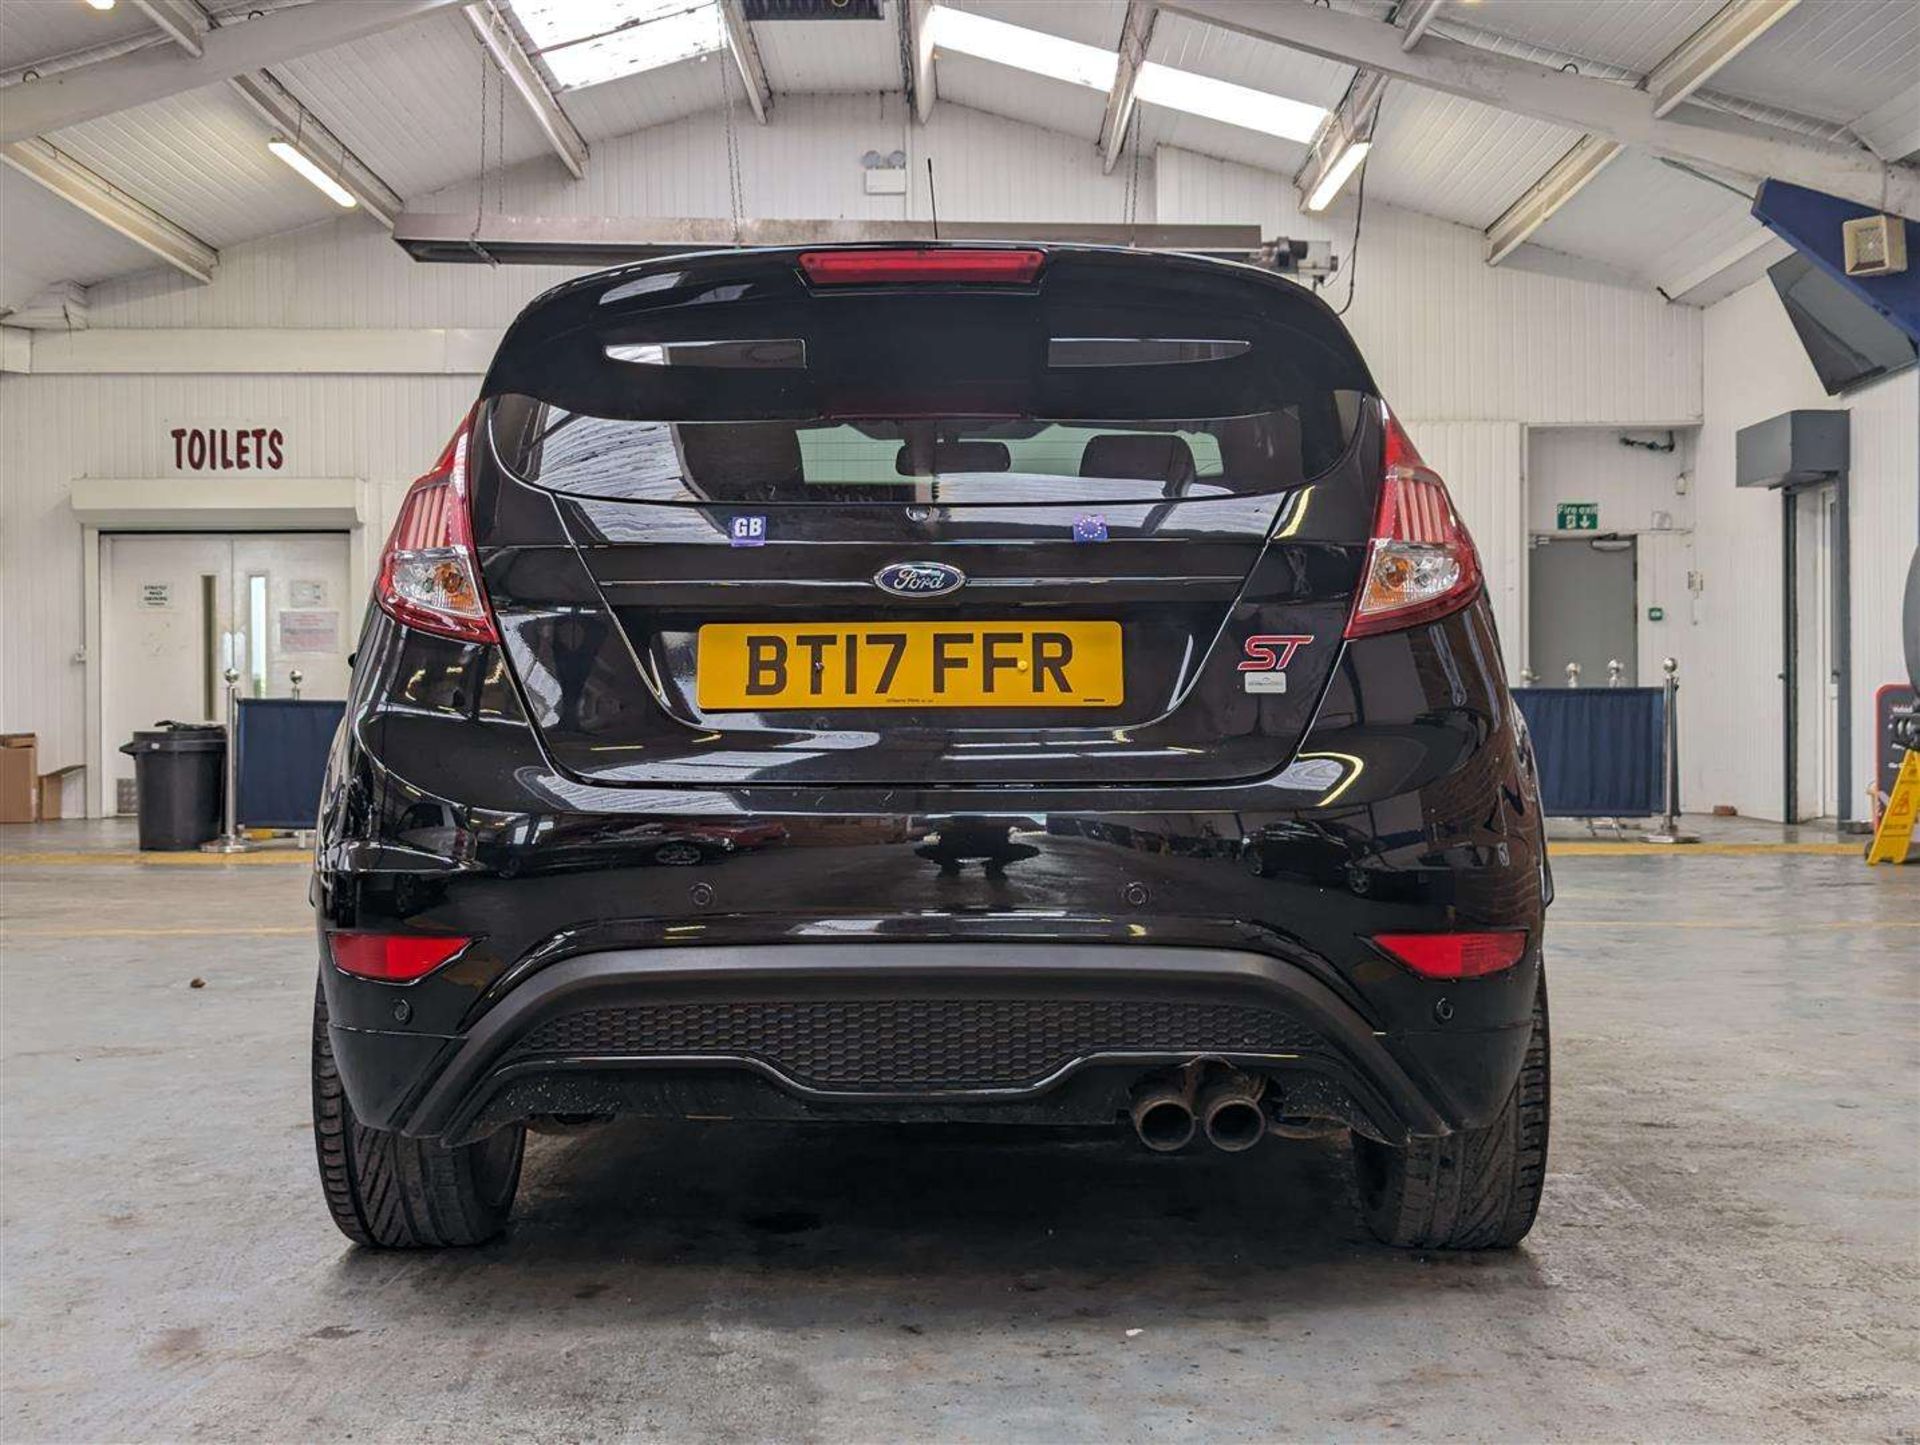 2017 FORD FIESTA ST-2 TURBO - Image 3 of 29